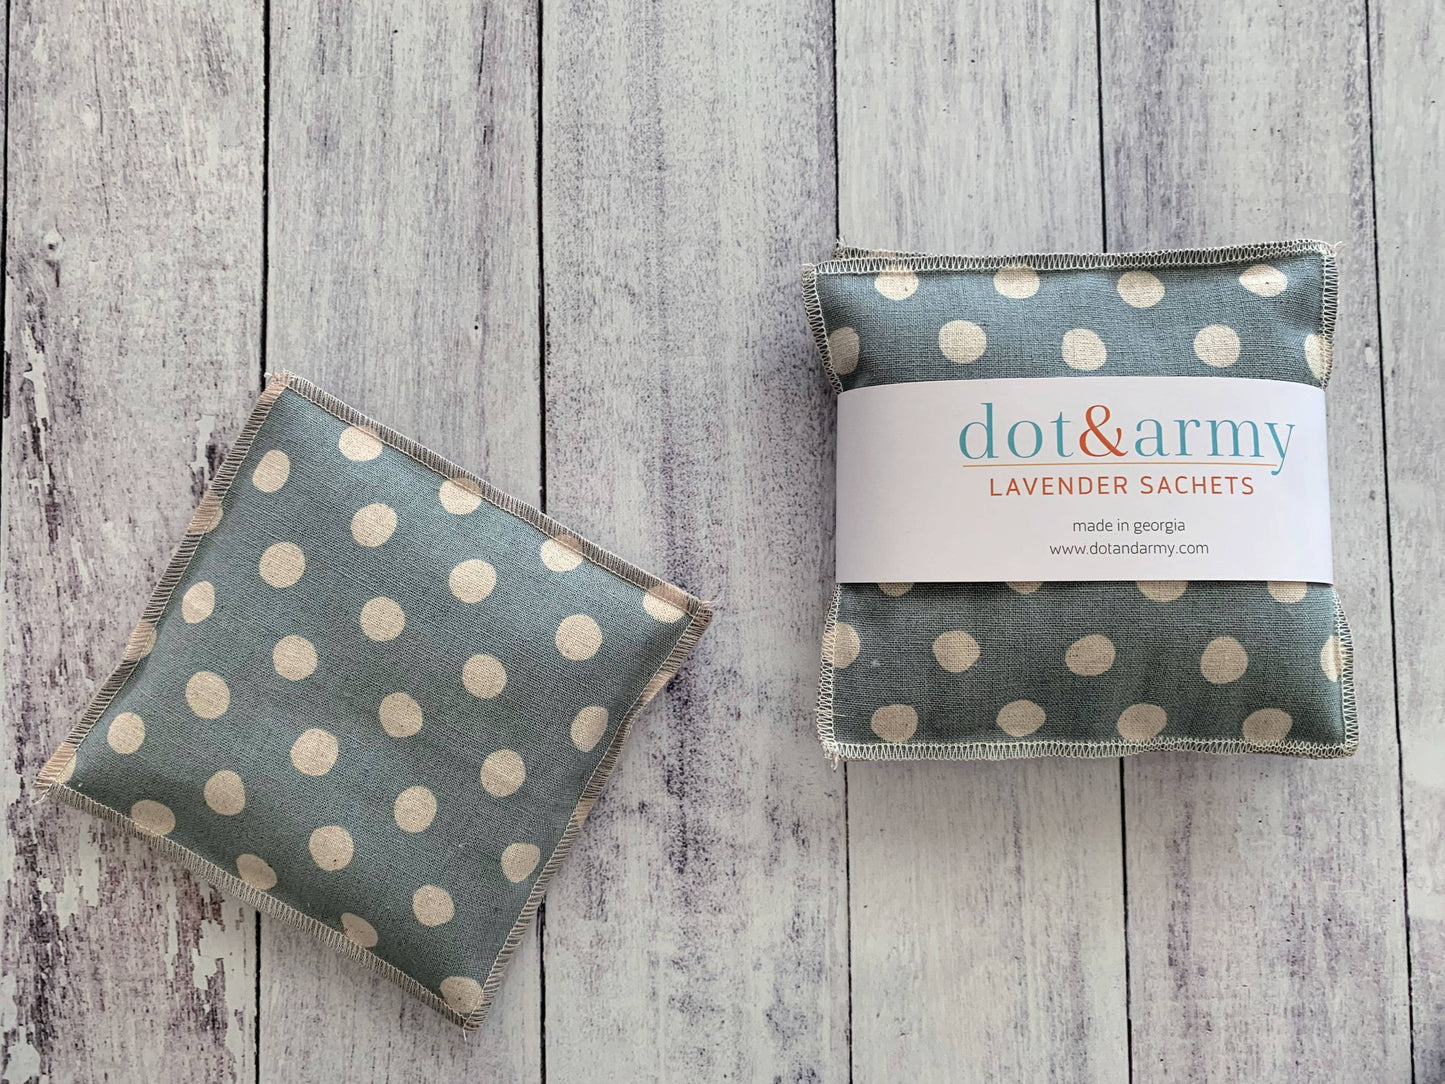 Floral and Dot Linen Lavender Sachets, set of three